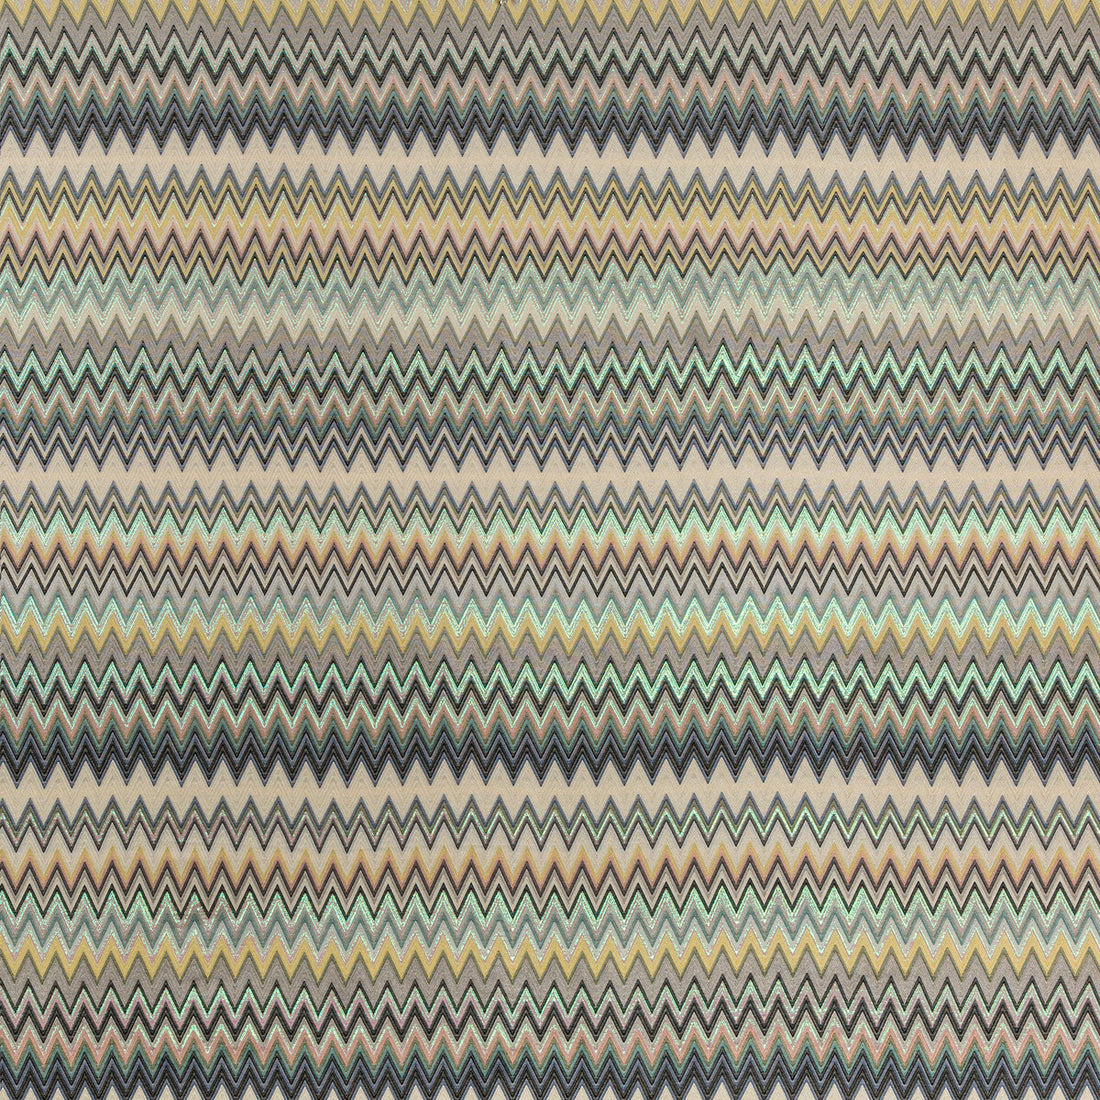 Masuleh fabric in 131 color - pattern 36168.316.0 - by Kravet Couture in the Missoni Home collection